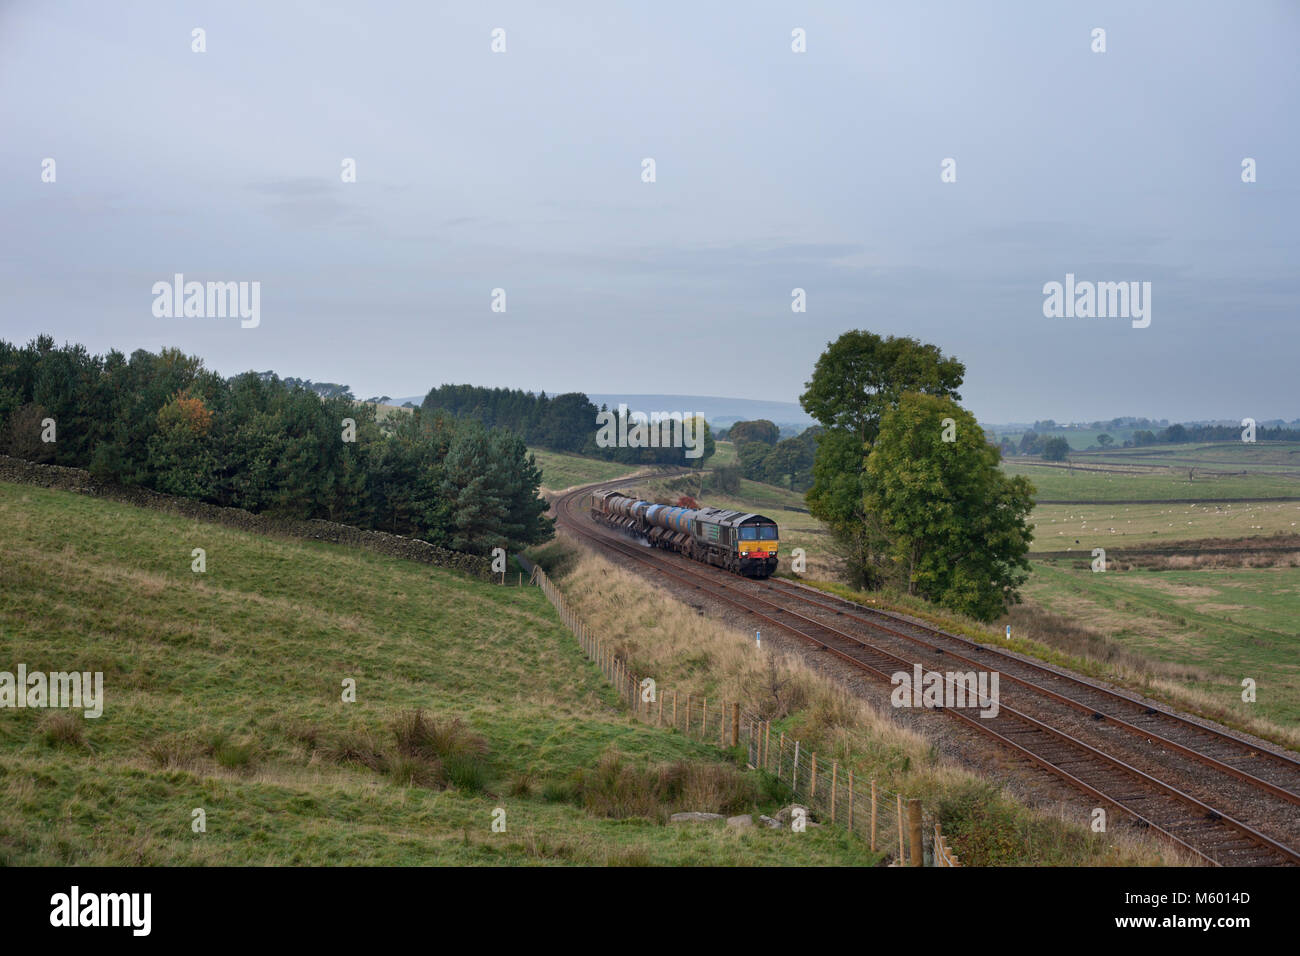 2 Direct rail Services class 66 locomotives pass Eldroth (between Clapham & Giggleswick, Yorkshire) with a Network Rail rail head treatment train. Stock Photo